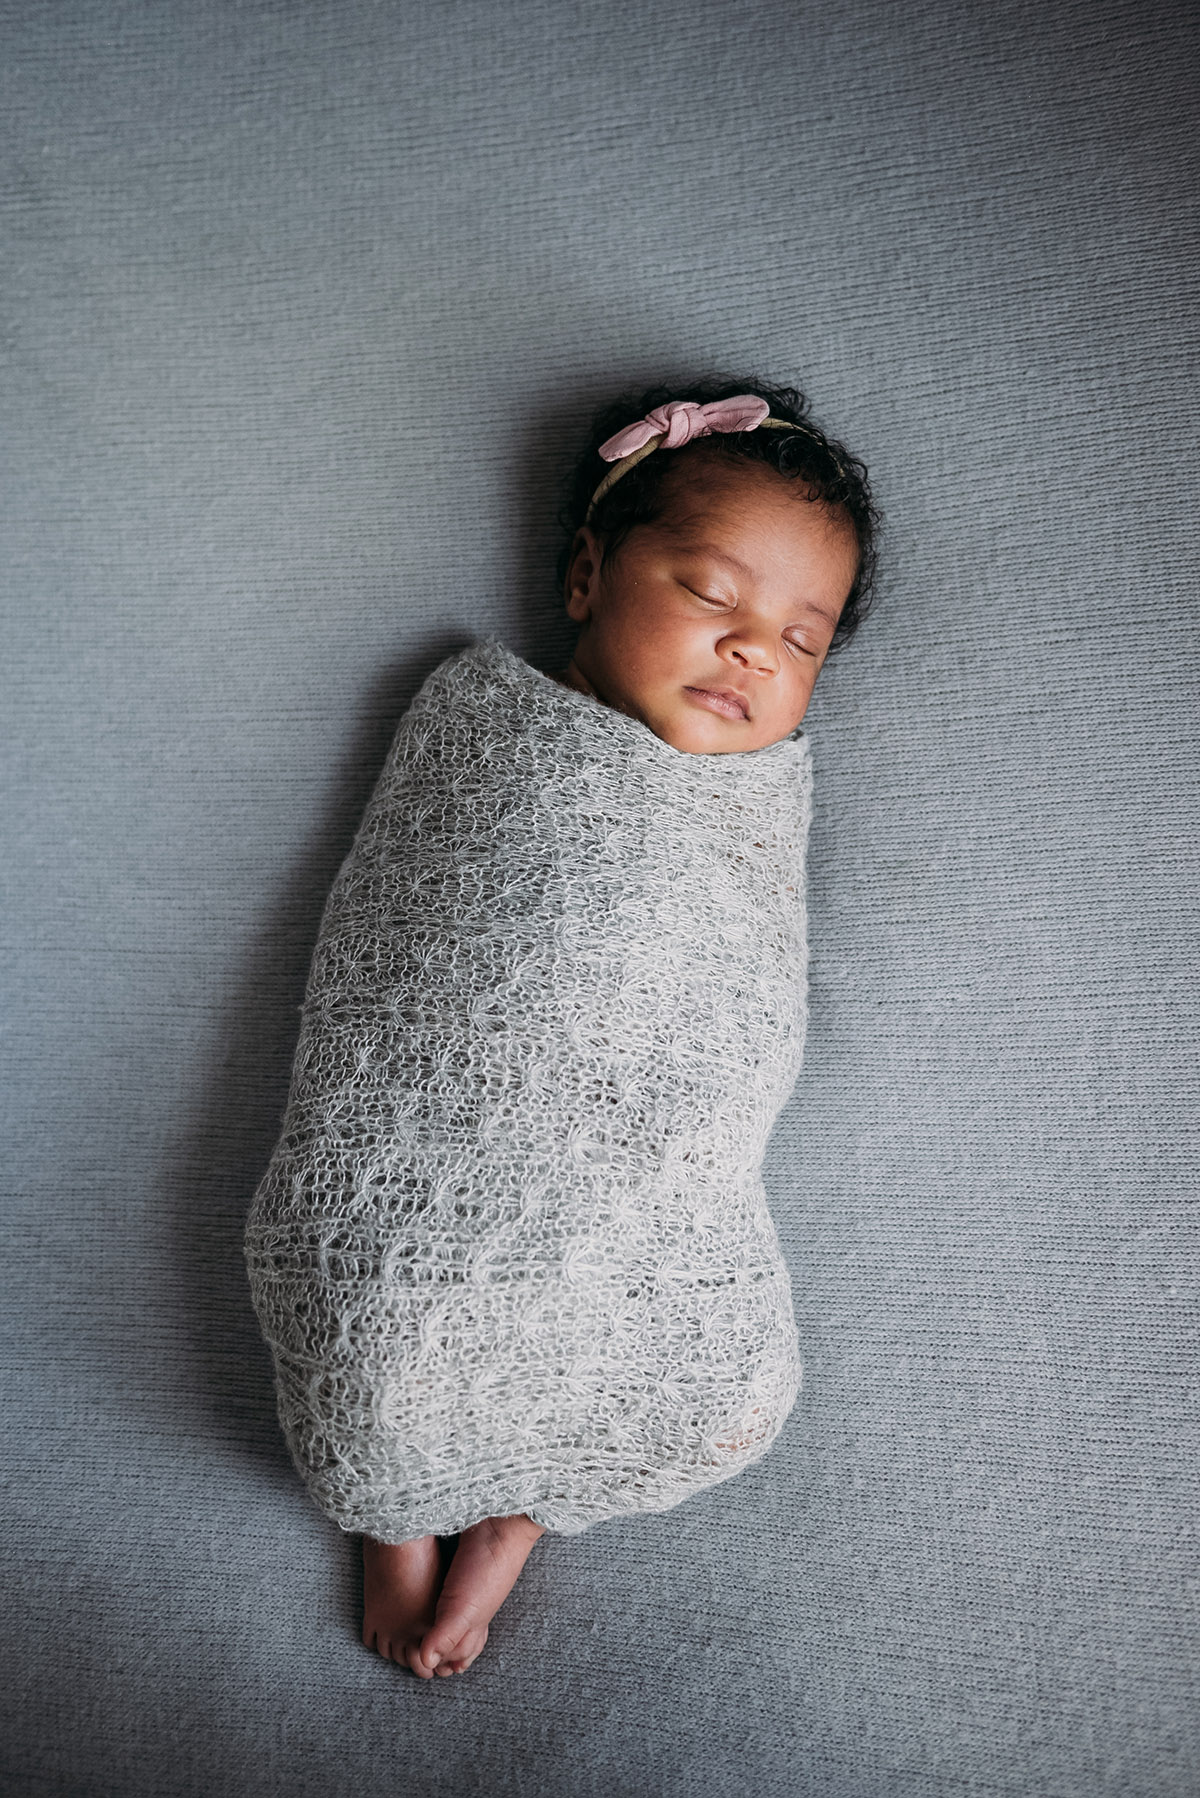 newborn swaddled in a grey blanket with its feet sticking out wearing a headband eyes closed